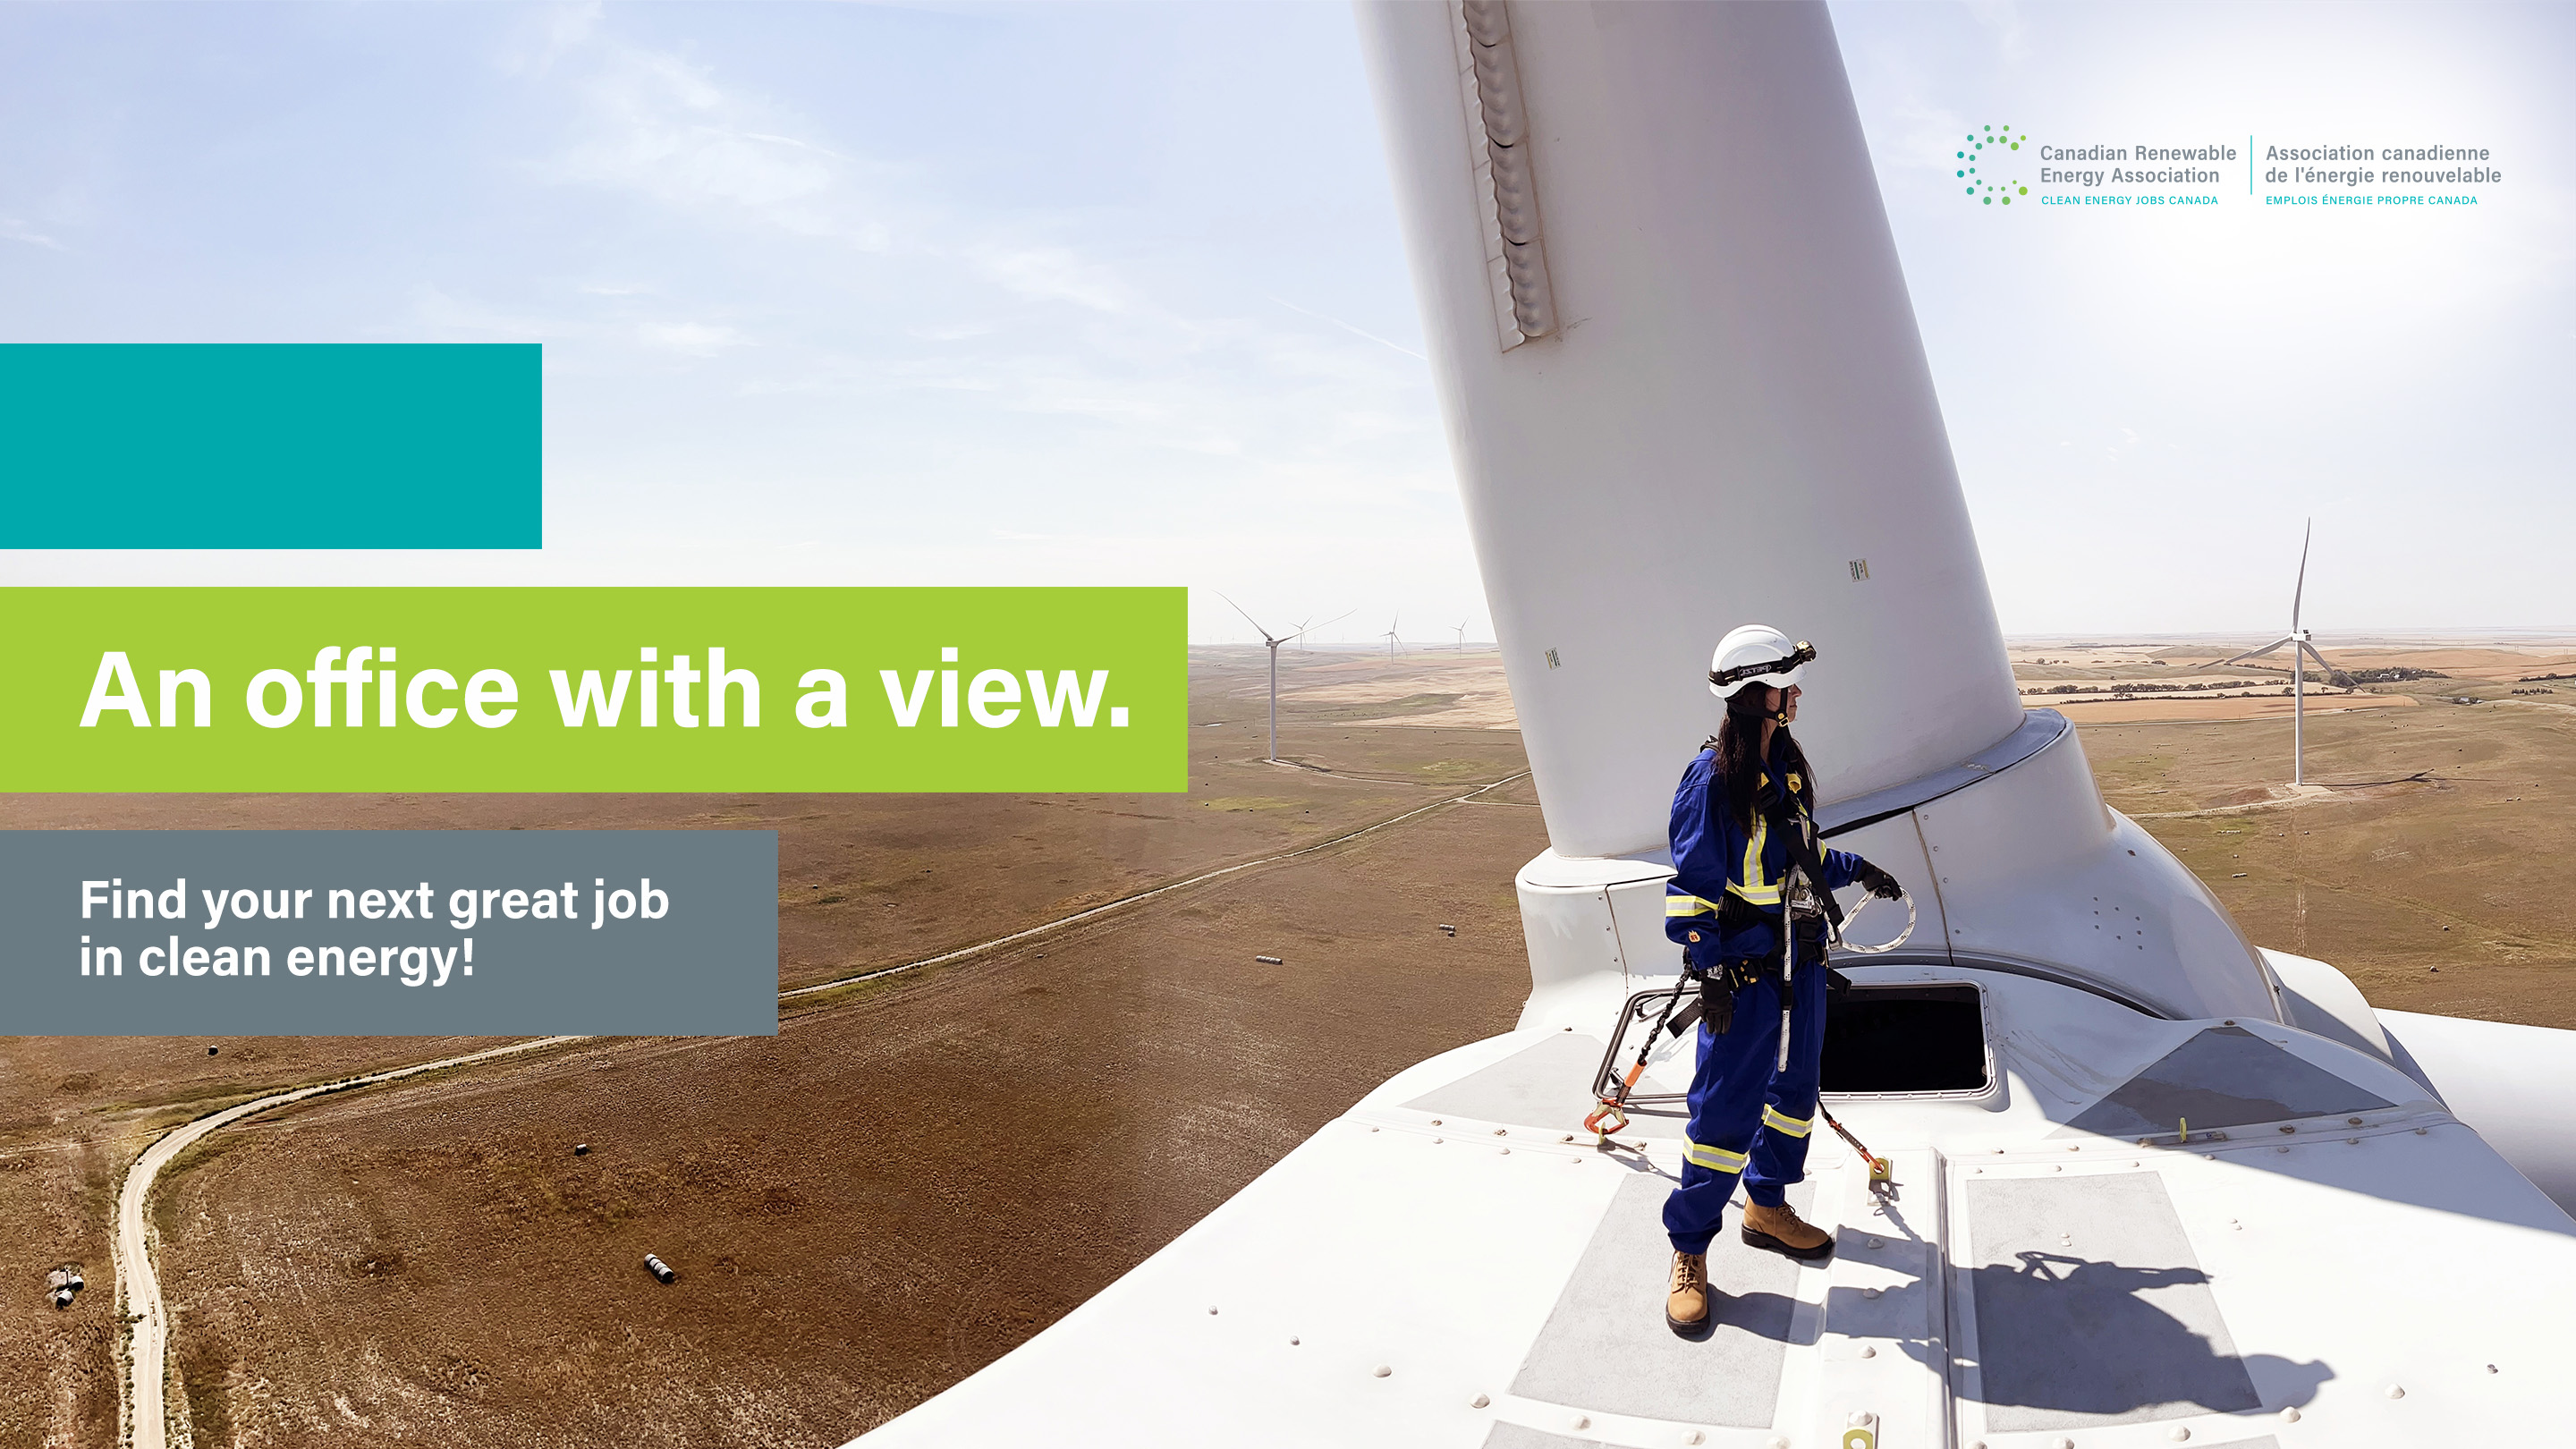 With the launch of Clean Energy Jobs Canada, CanREA aims to connect employers and job seekers in the growing renewables and energy storage industries.